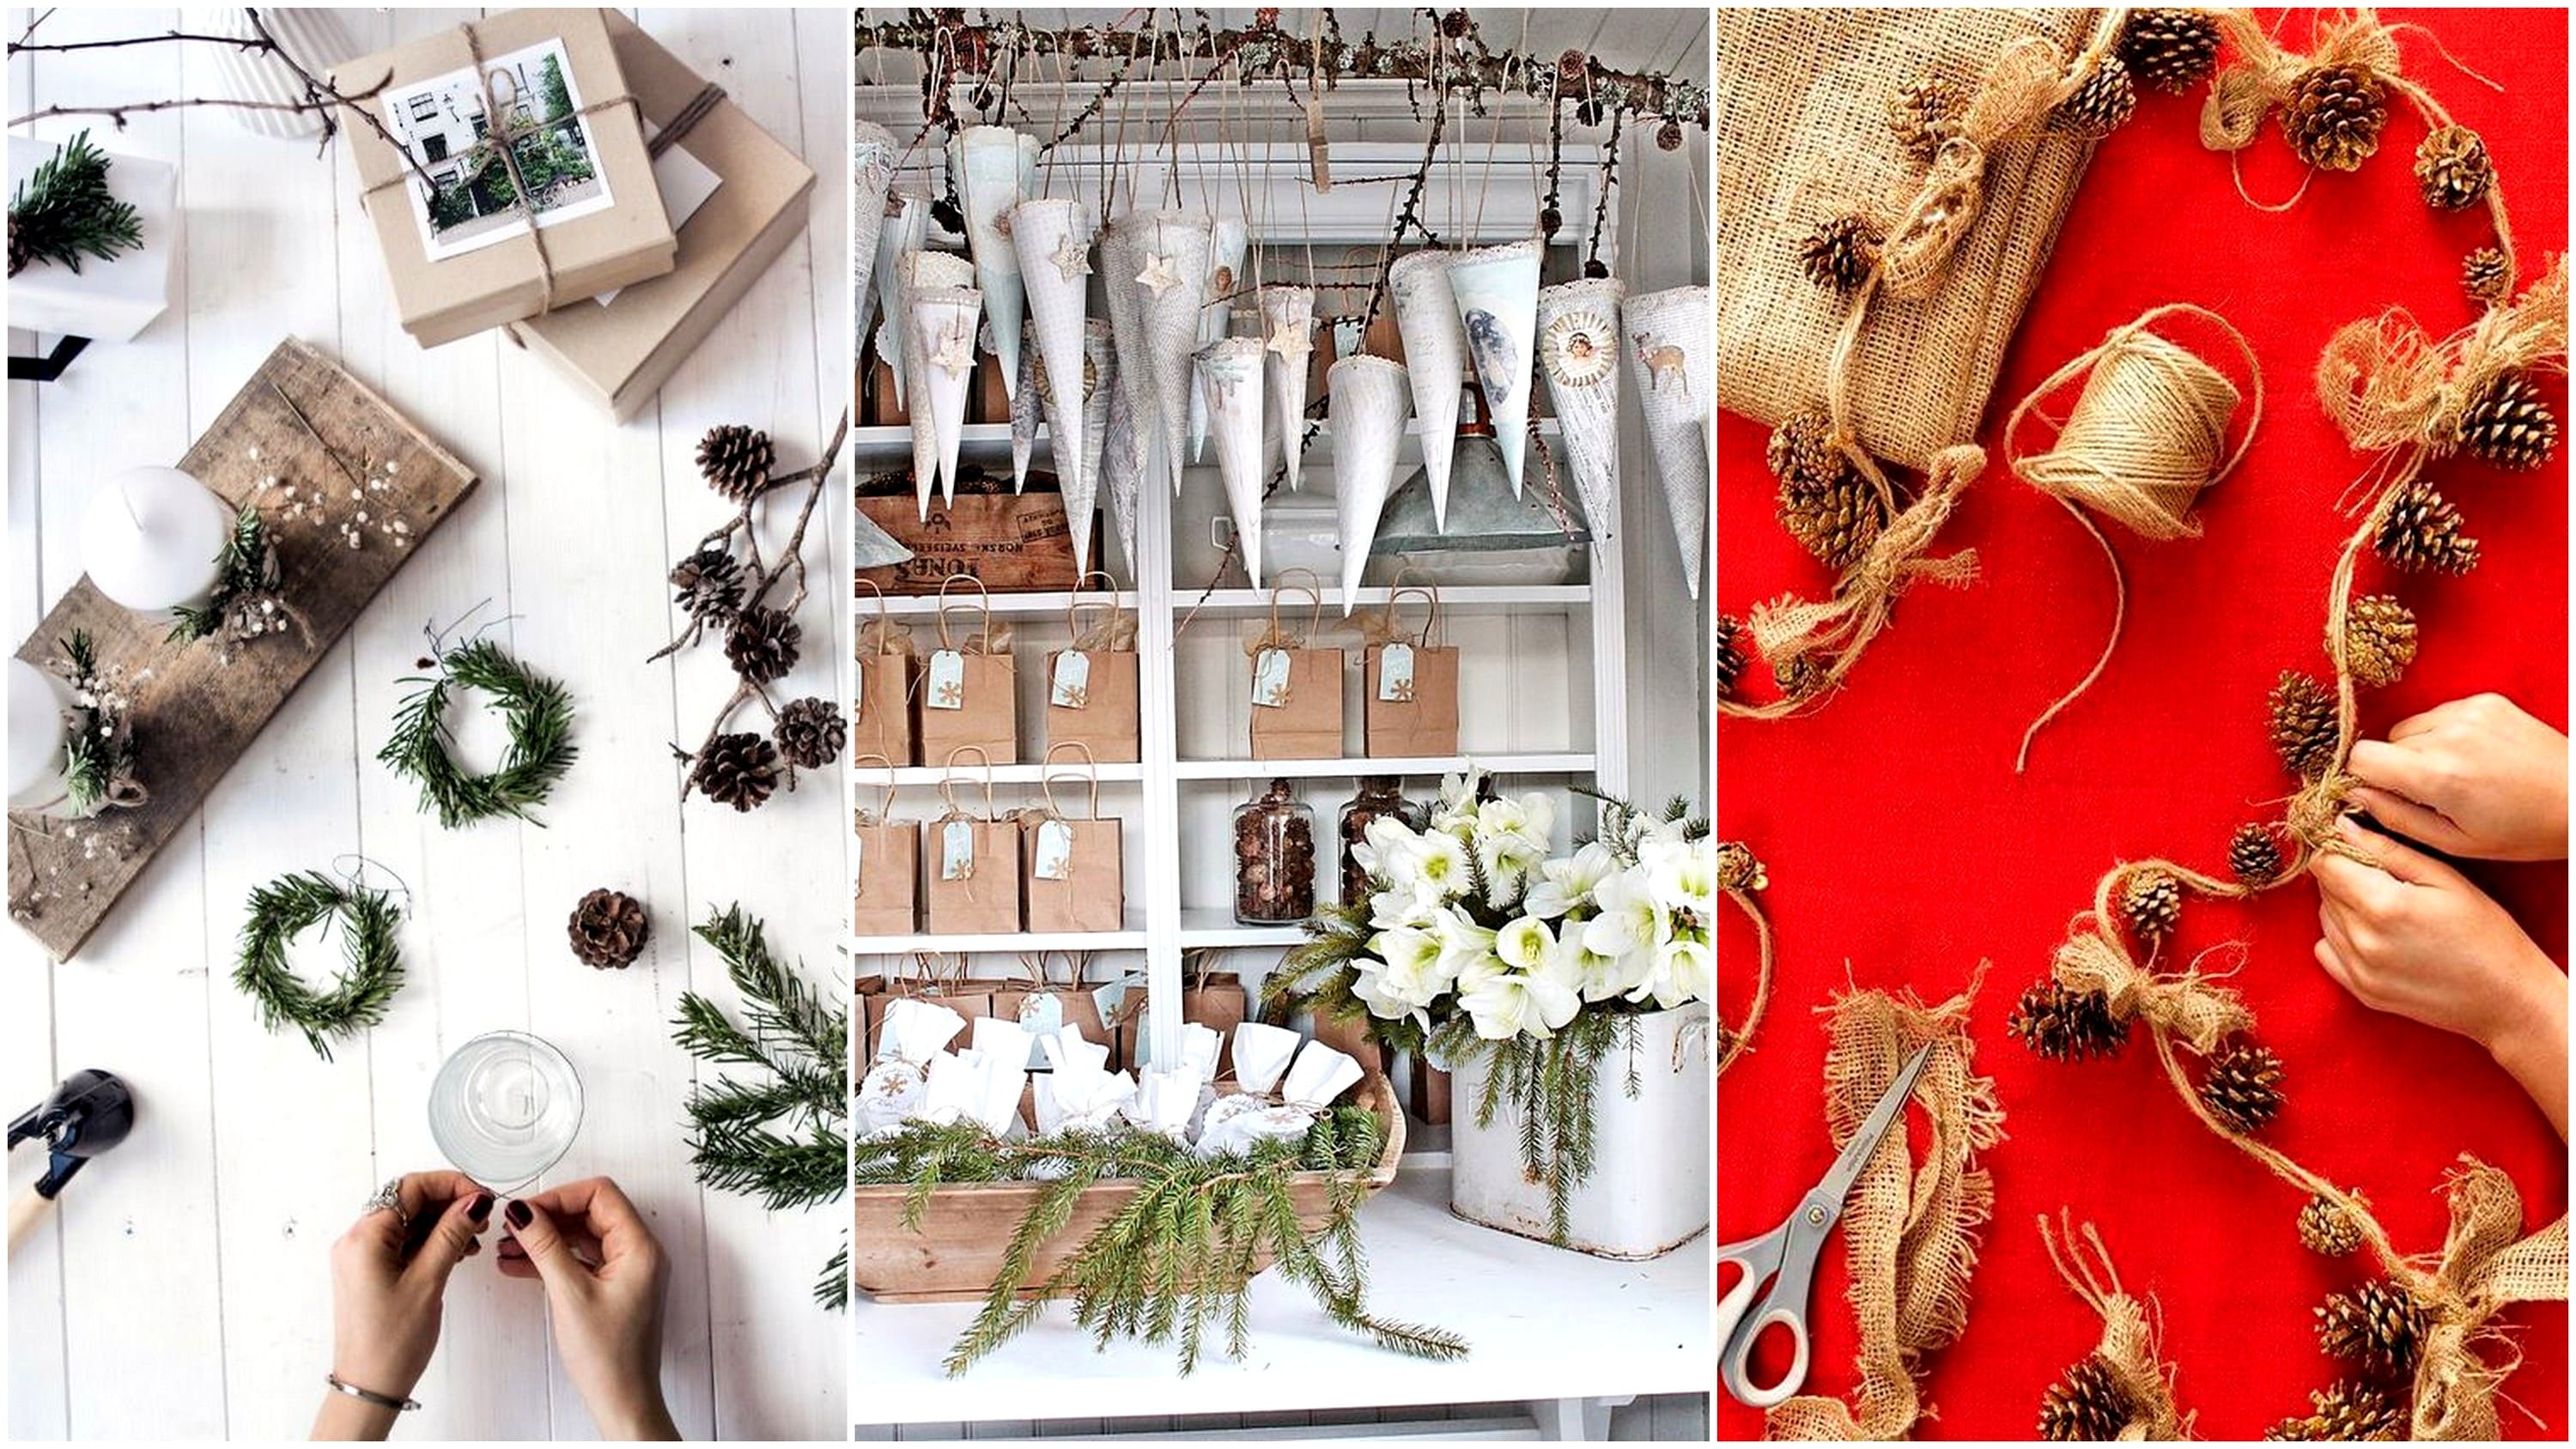 29 splendid ideas on how to decorate for christmas on a budget